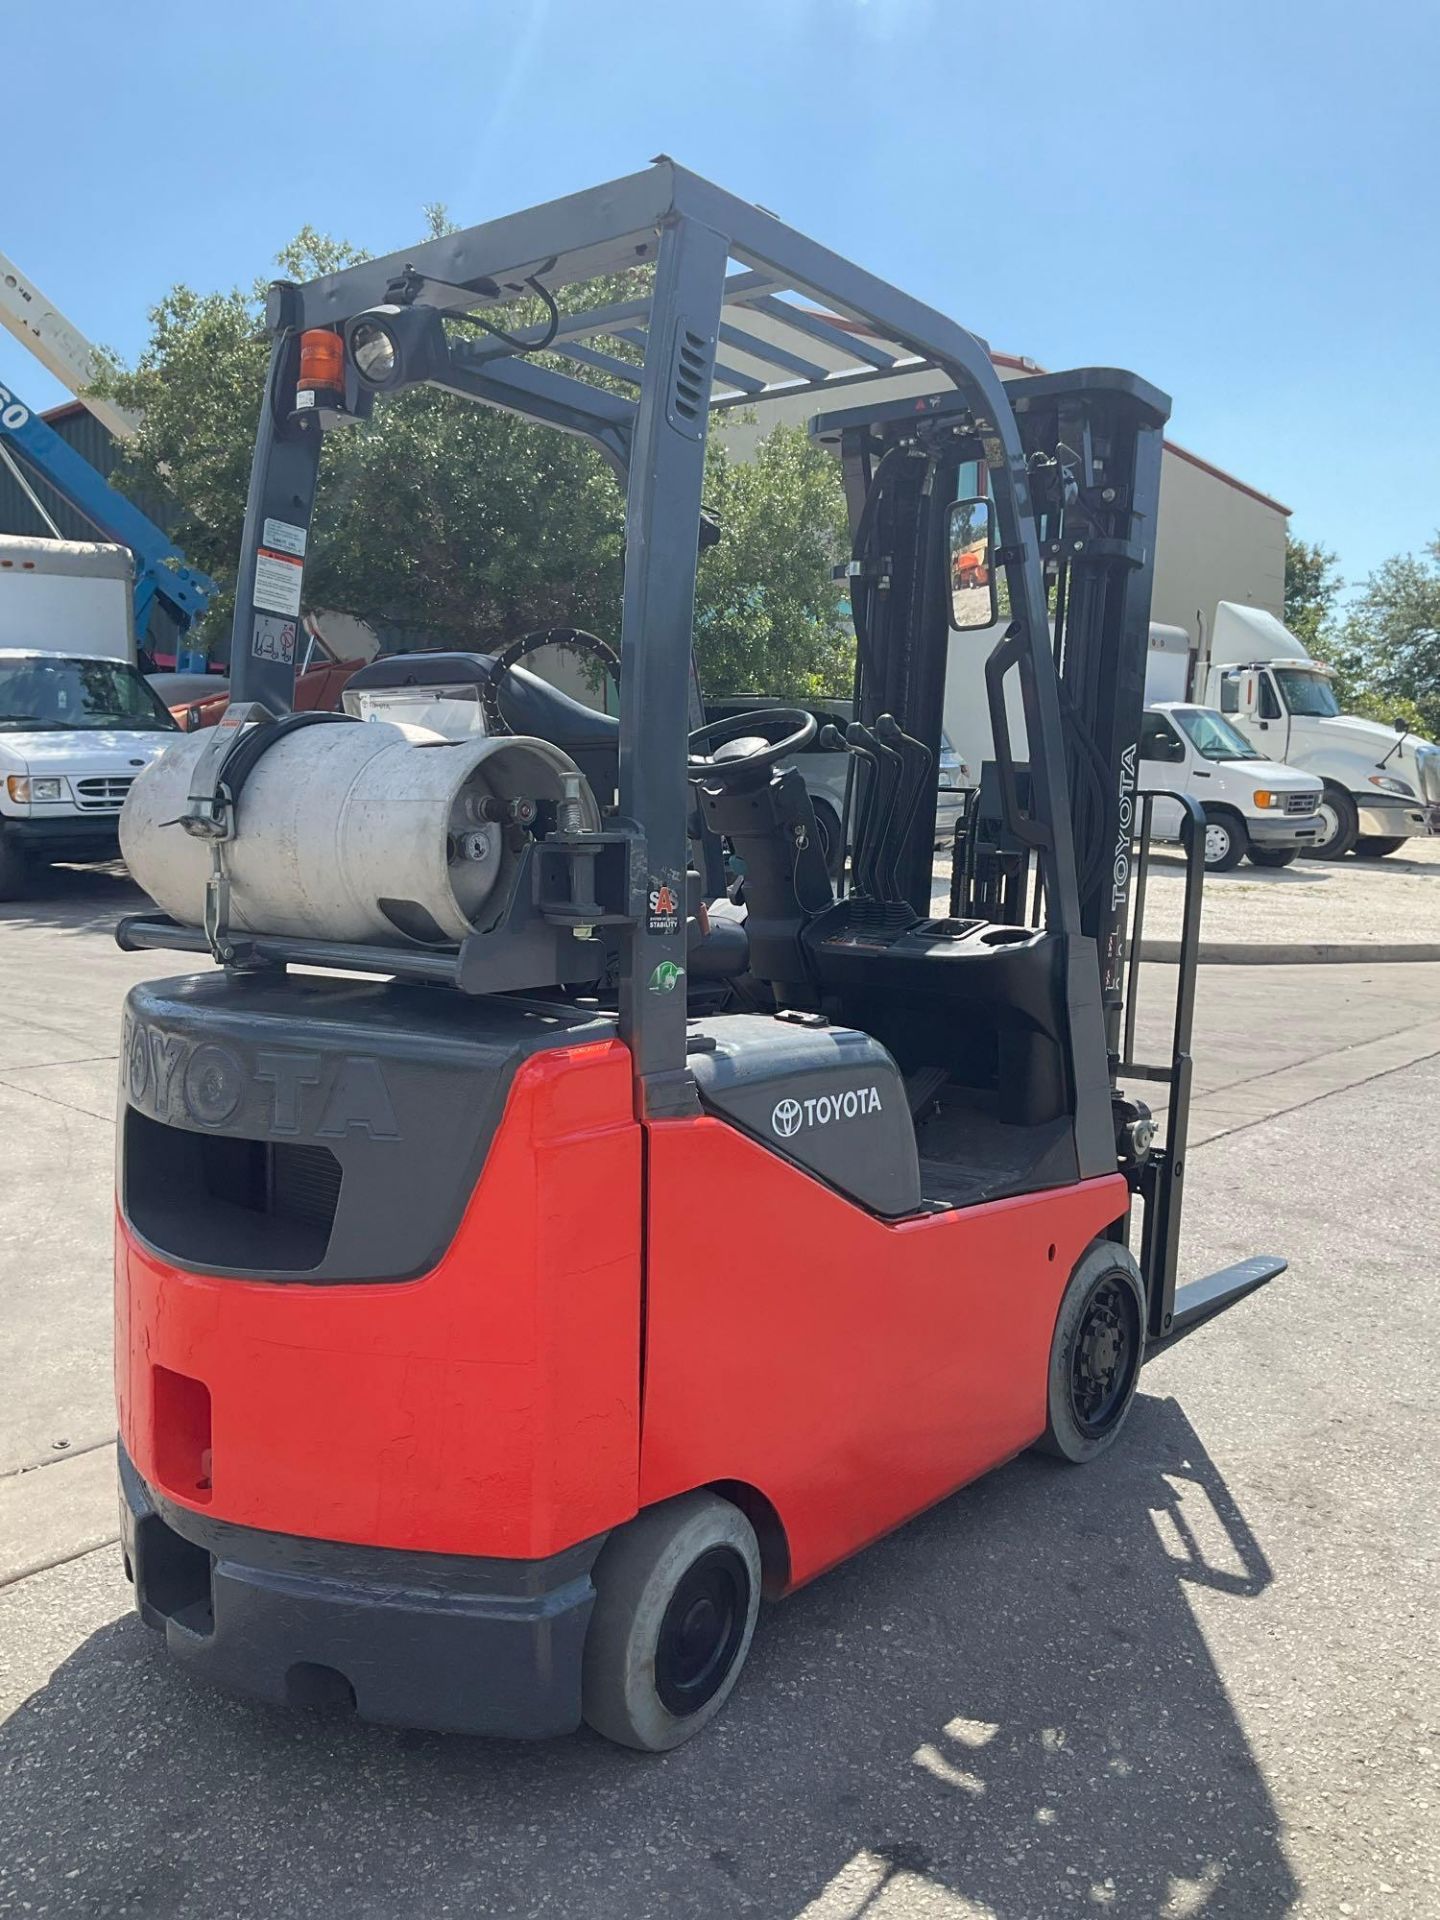 2019 TOYOTA FORKLIFT MODEL 8FGCU15, LP POWERED, APPROX MAX CAPACITY 2500, MAX HEIGHT 189in, TILT, - Image 5 of 12